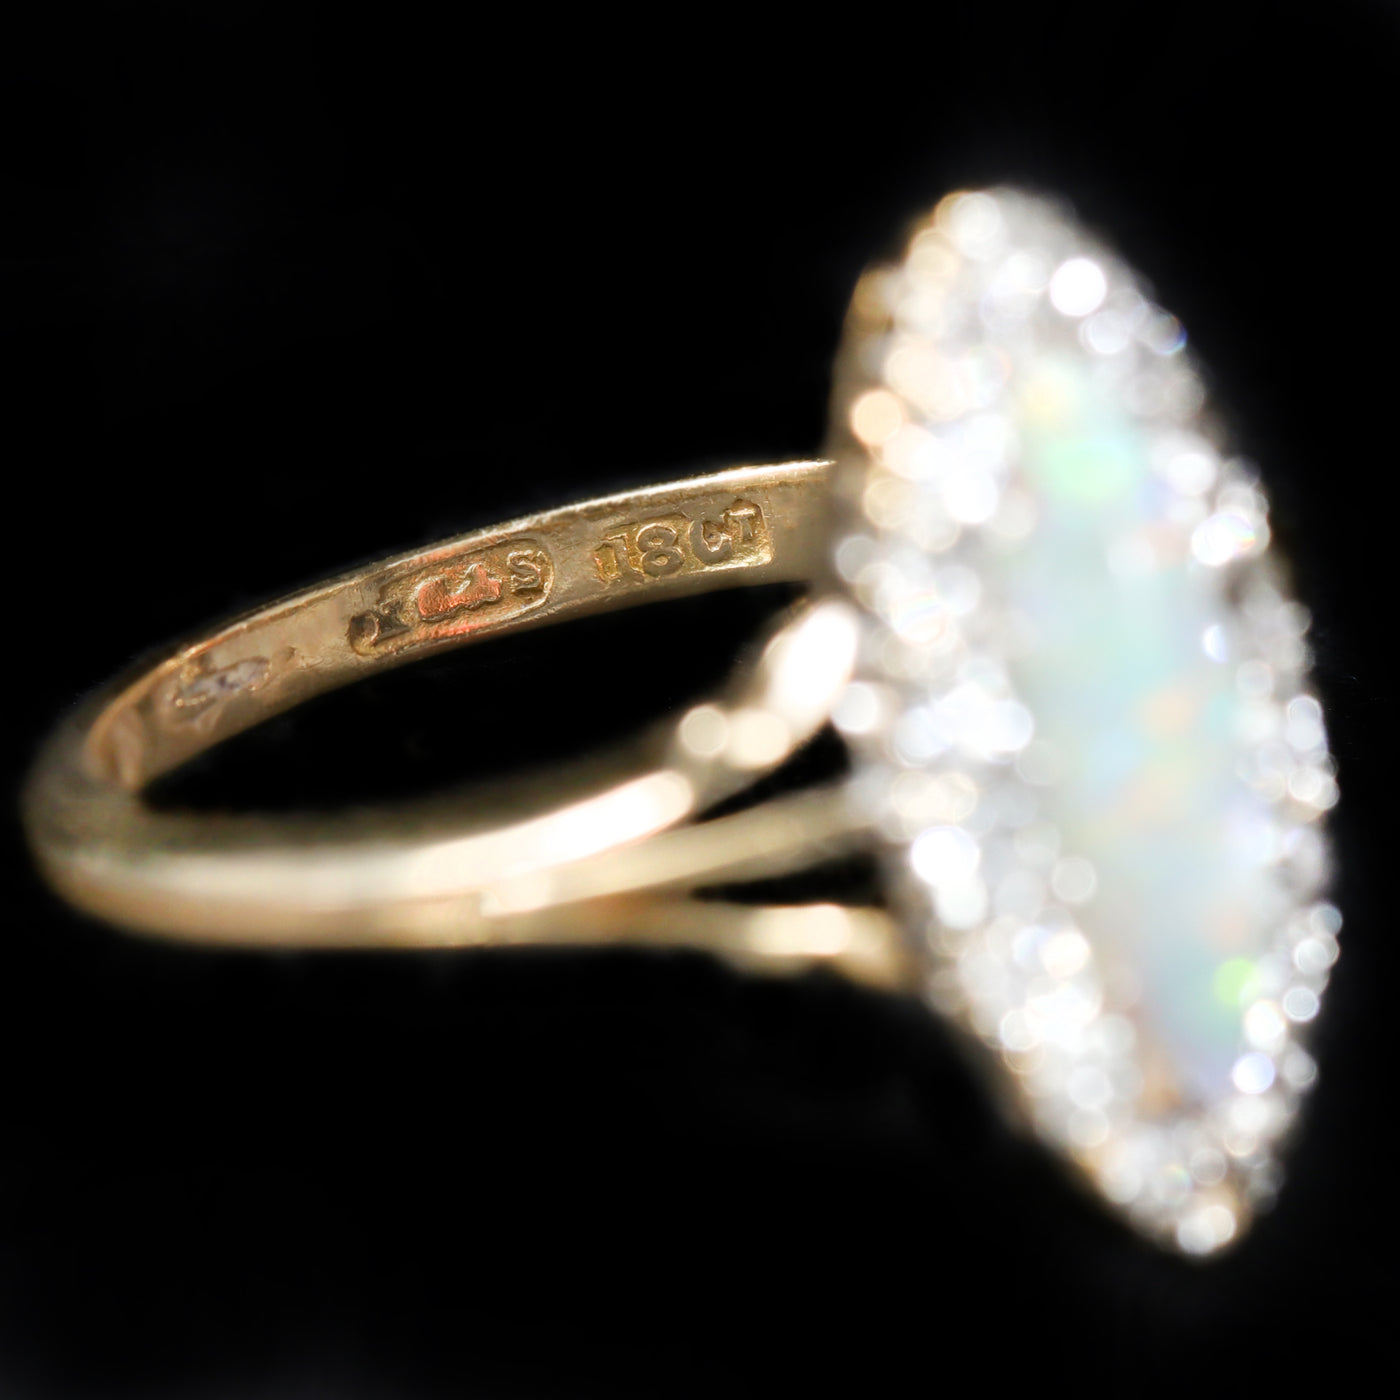 Victorian 18K Yellow Gold 1.25 Carat Opal and Diamond Ring